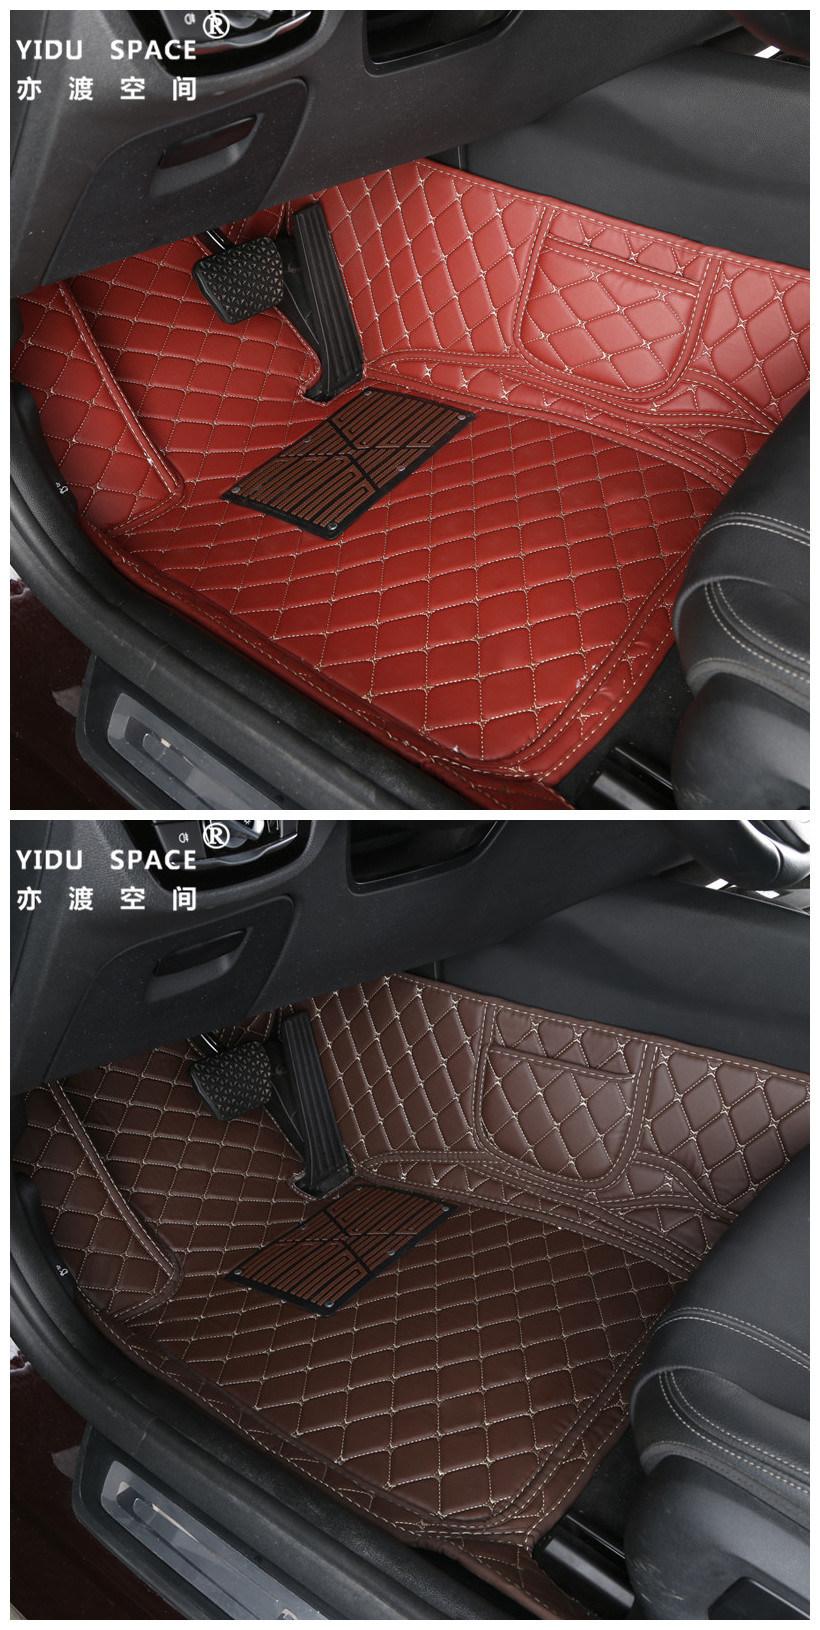 Wholesale Customized Special Leather Anti Slip 5D Car Floor Mats